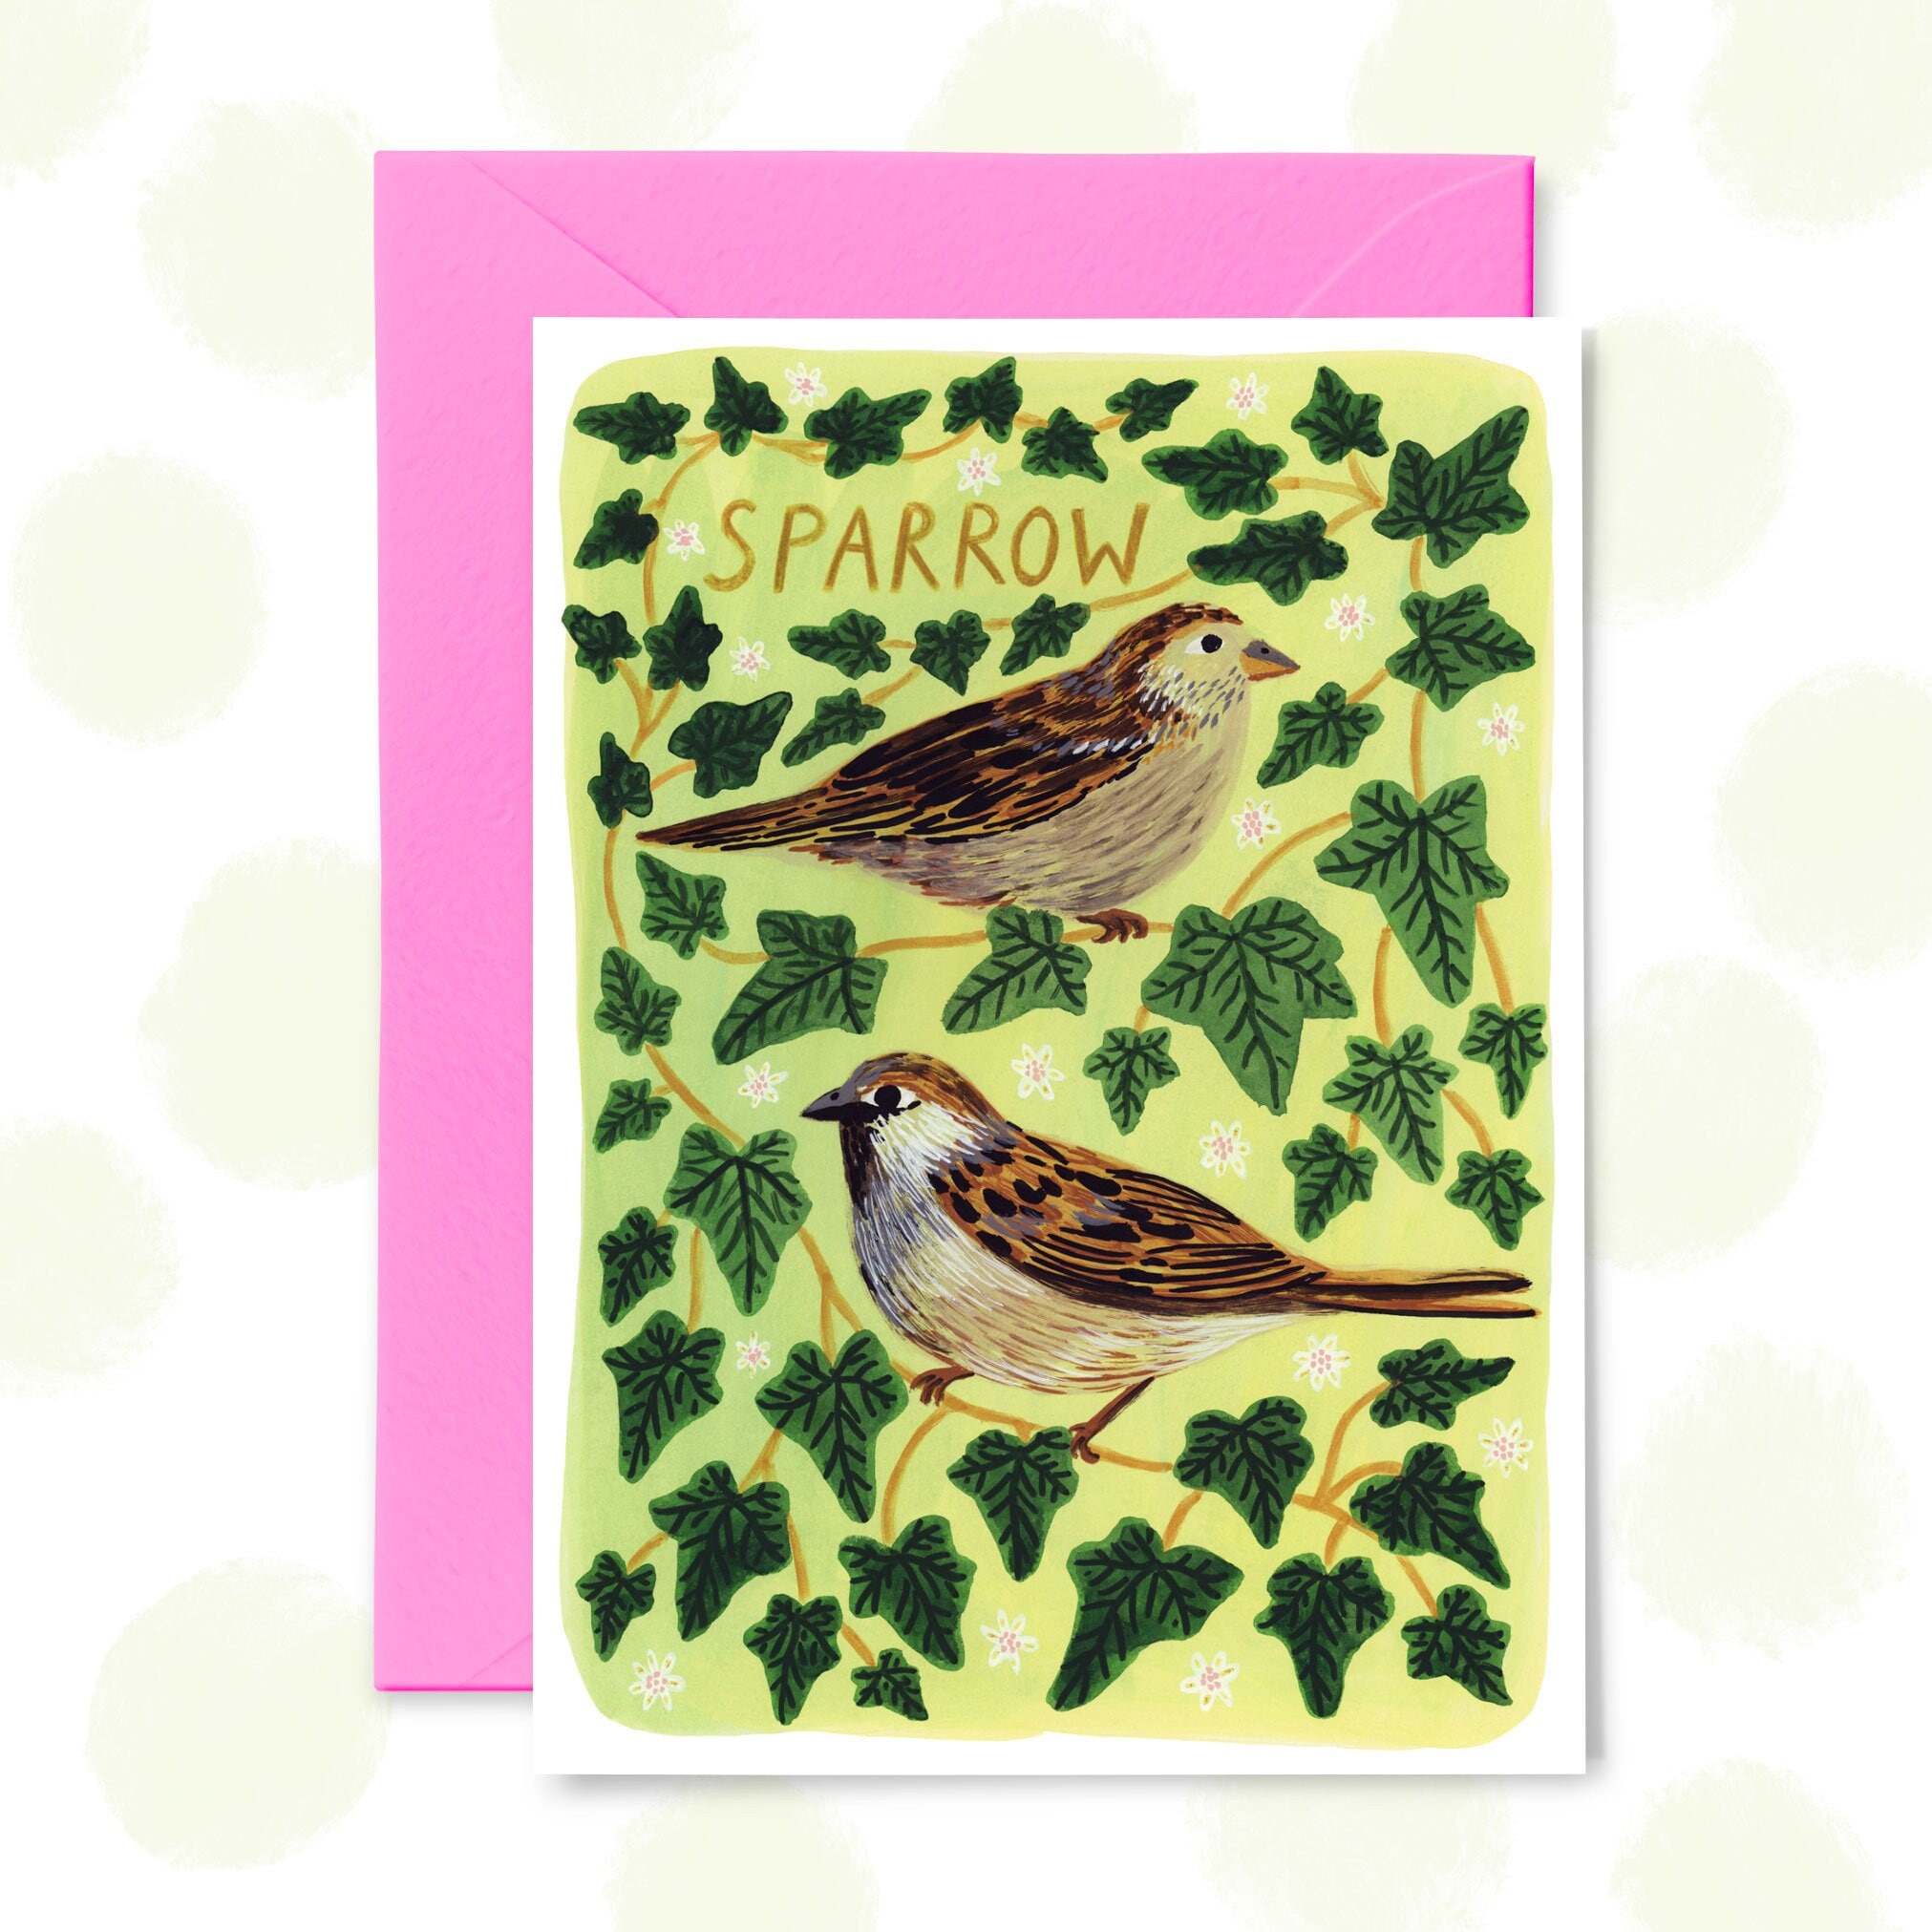 Wild Birds Sticker Sets, Bujo, Journal Supplies, Happy Mail, Scrapbooking,  Card Making, Sparrow, Parrot, Finch, Stationery, Embellishments. 